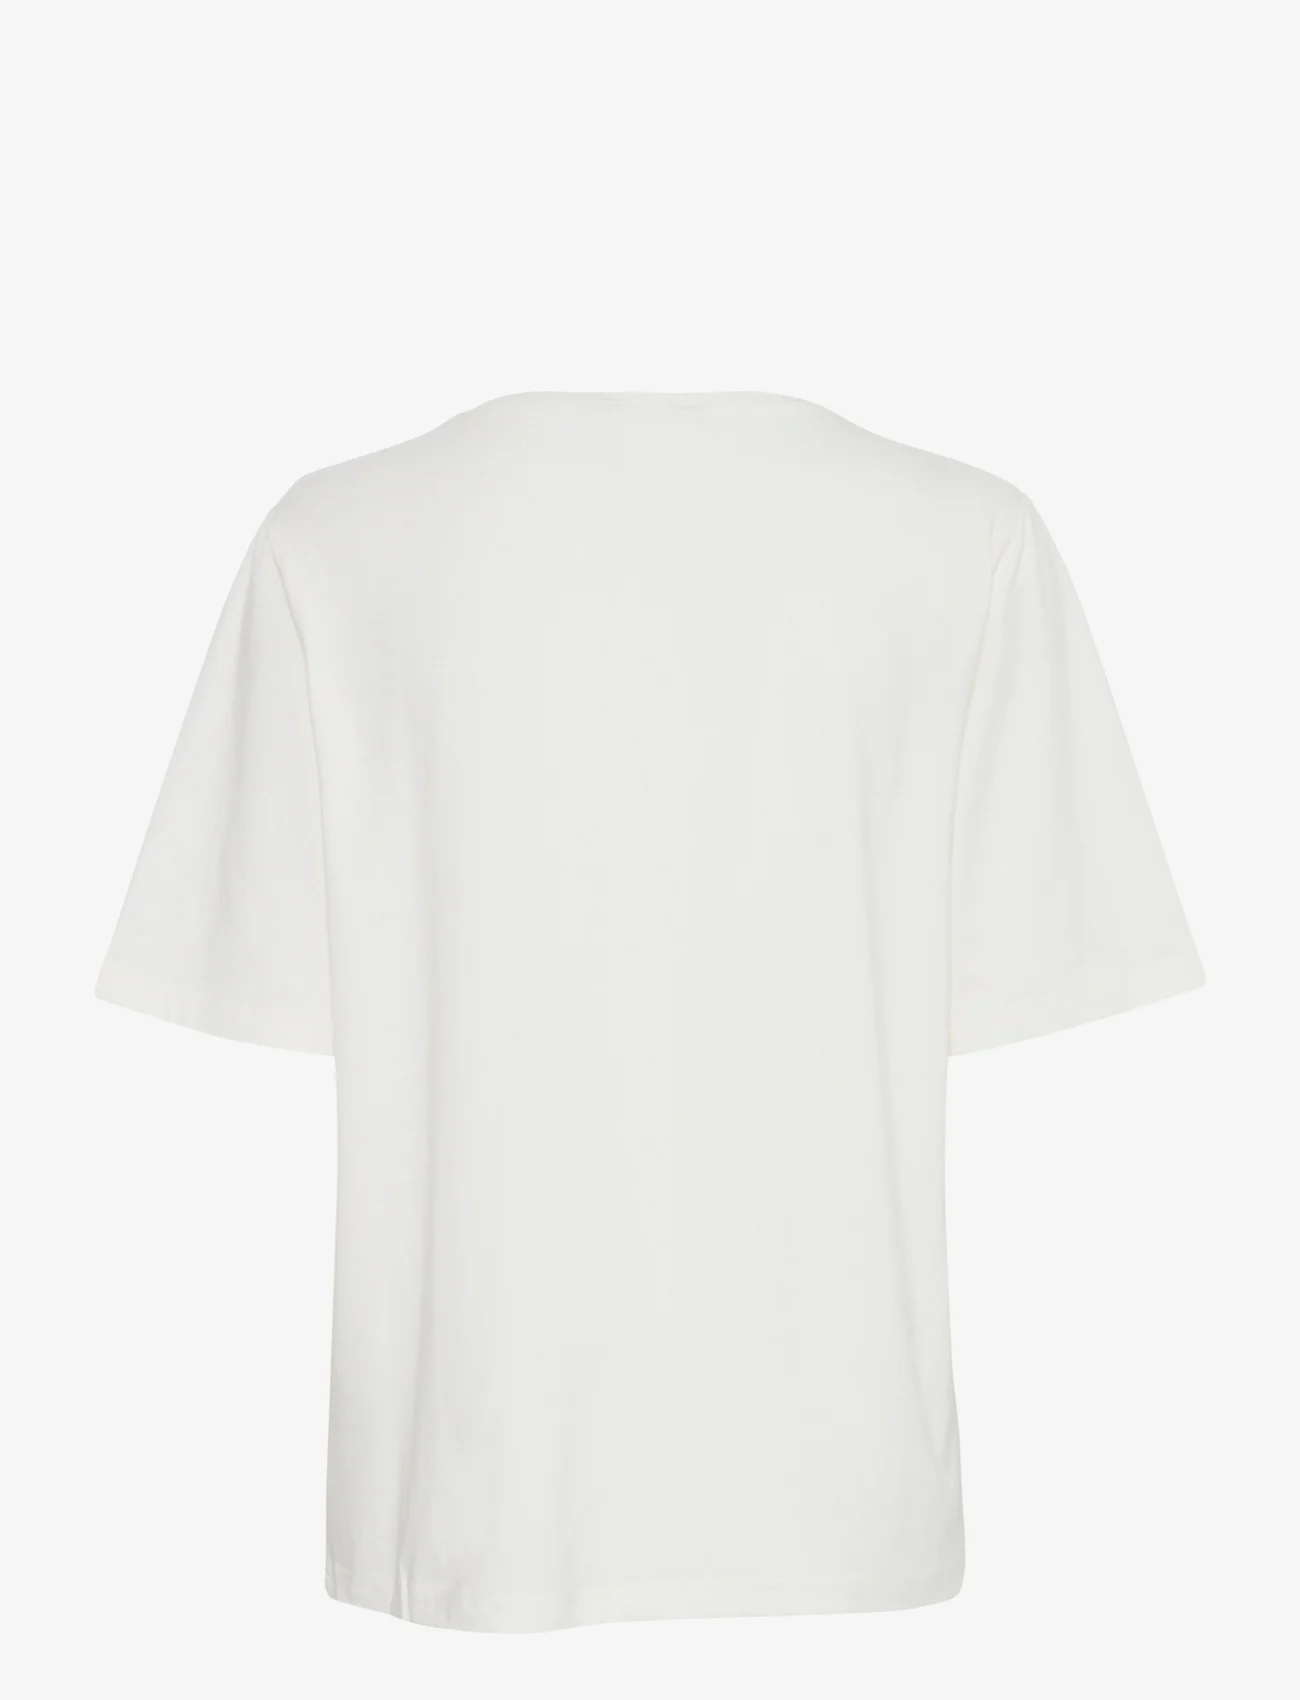 b.young - BYPAMILA HALF SL TSHIRT 2 - - t-paidat - off white - 1